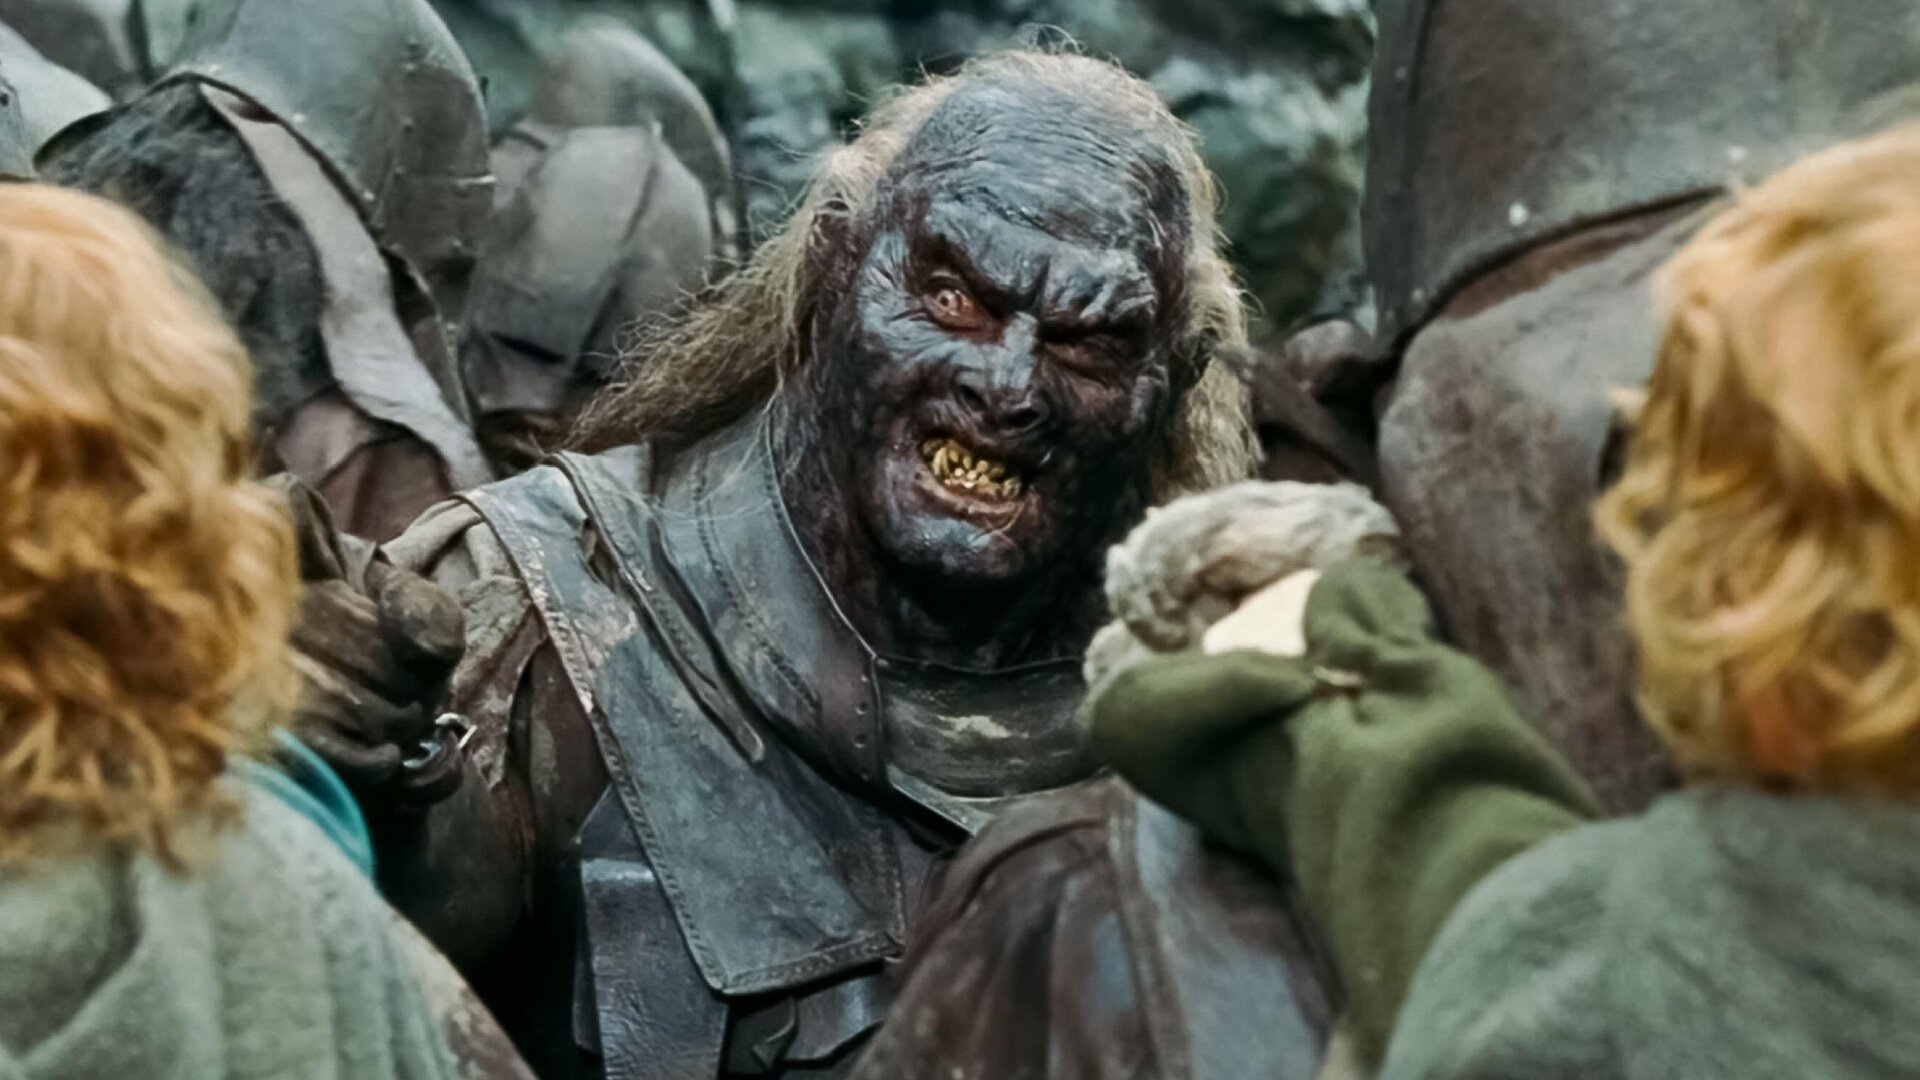 One LORD OF THE RINGS Orc Was Designed to Look Like Harvey Weinstein